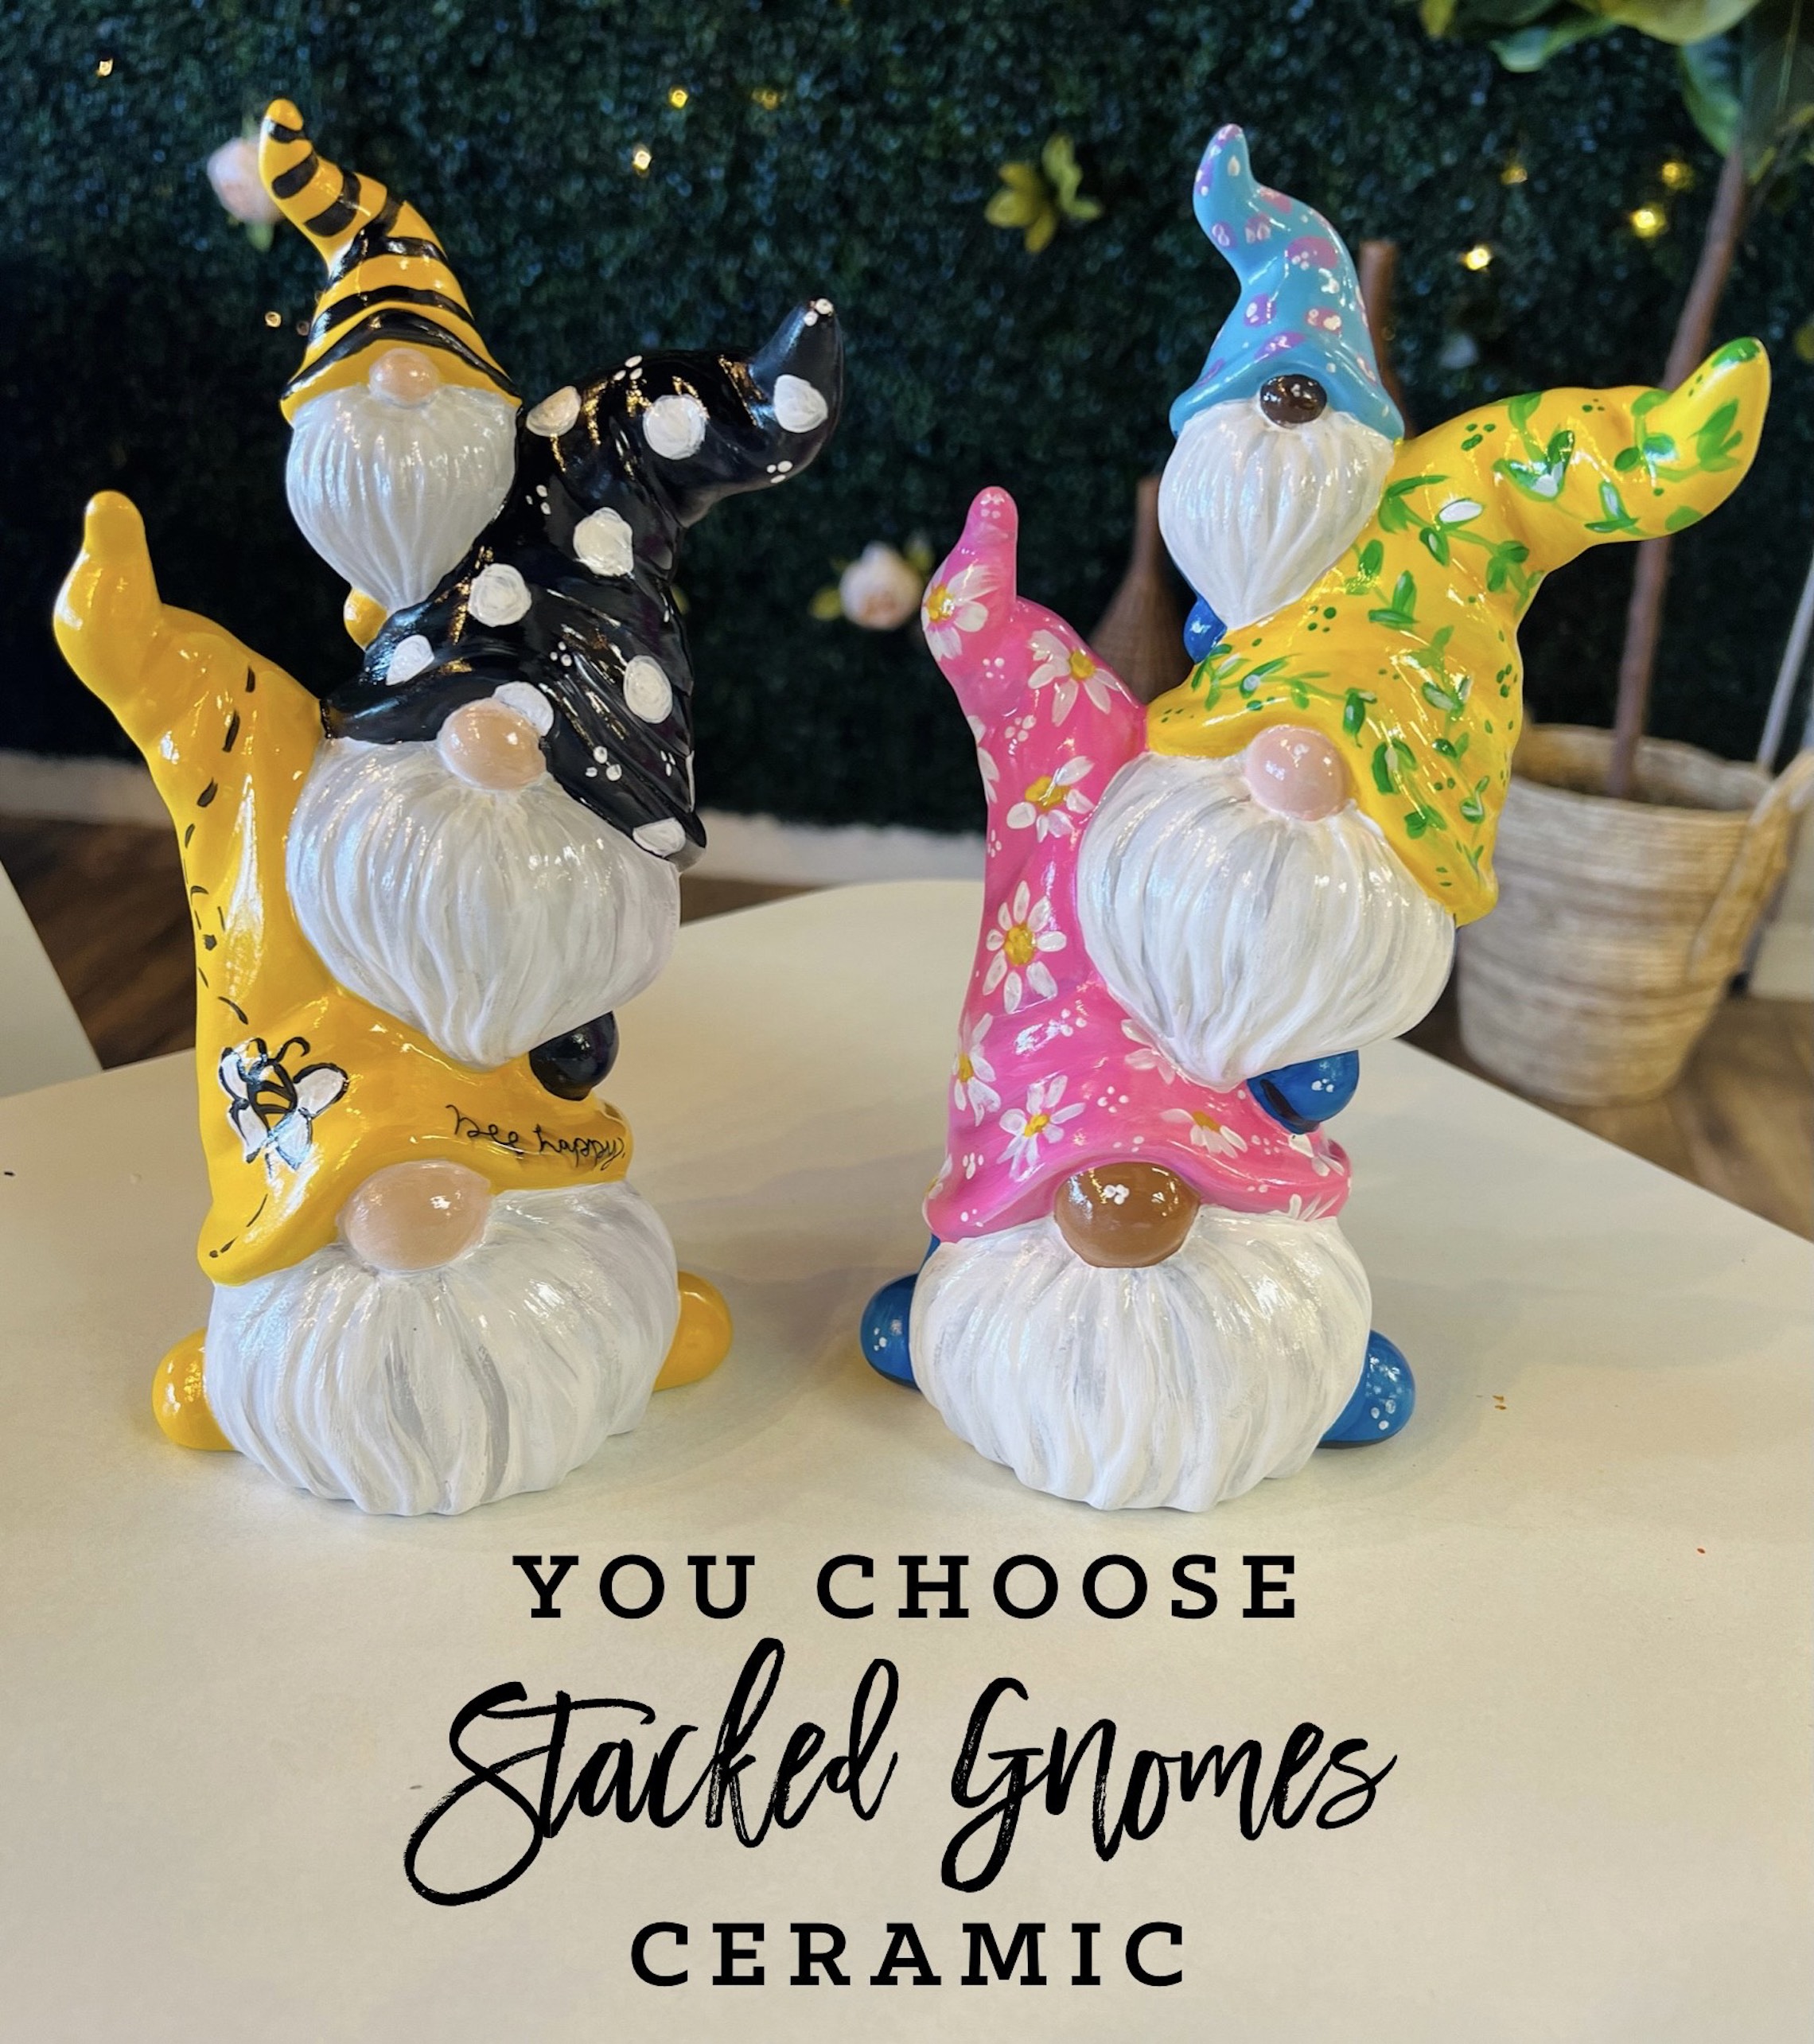 4 SEATS LEFT! You Choose! Ceramic Stacked Gnomes